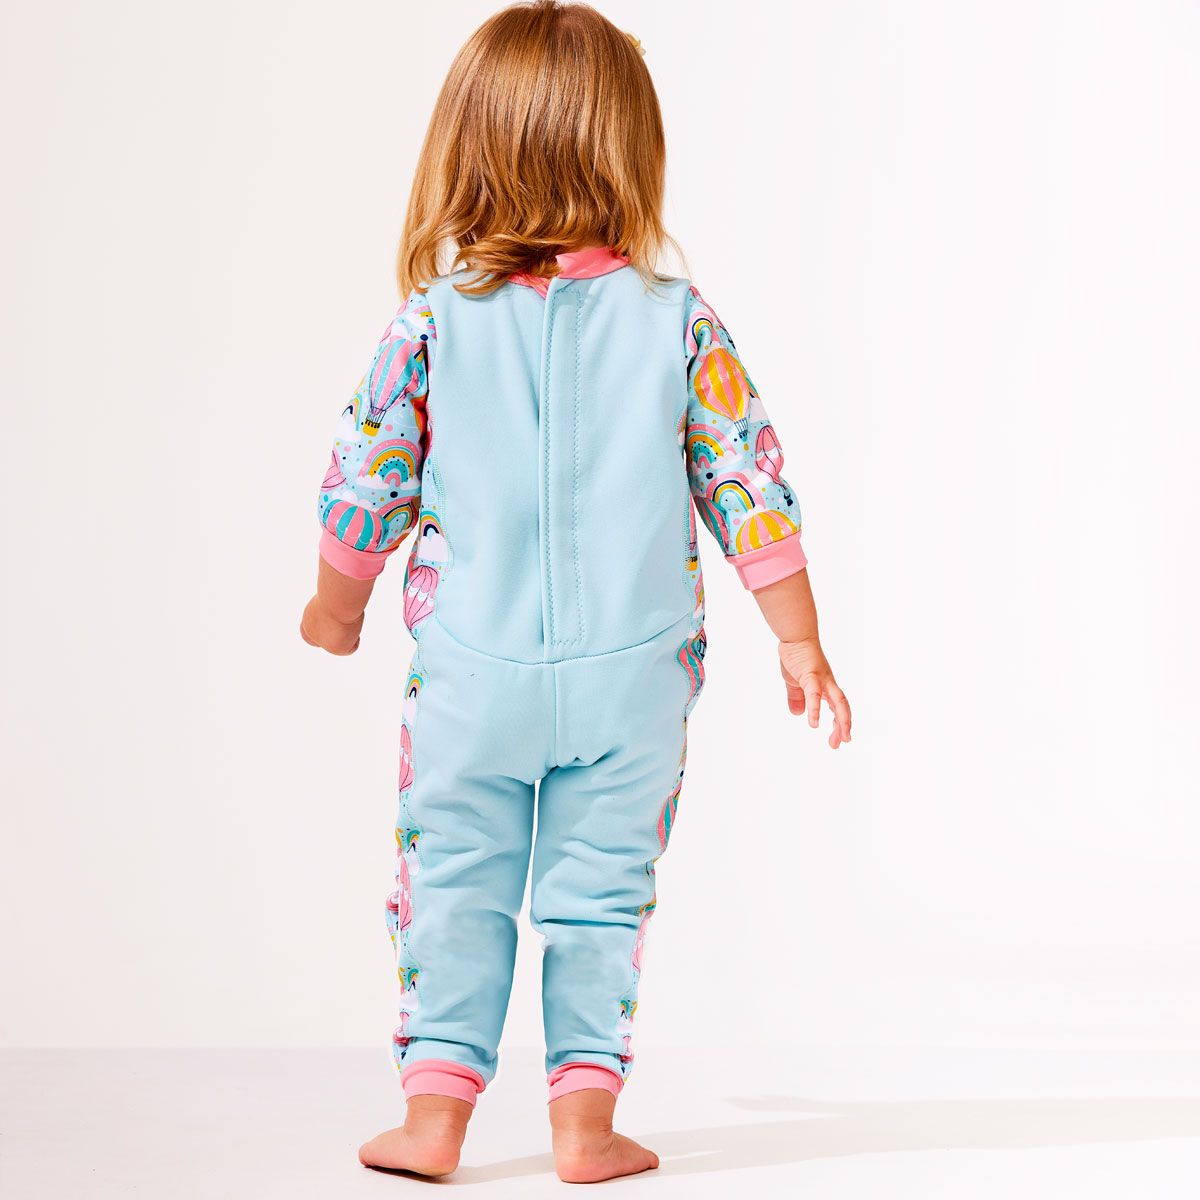 Lifestyle image of toddler wearing a fleece-lined baby wetsuit in baby blue with pink trims and hot air balloons themed print, including rainbows and clouds. 